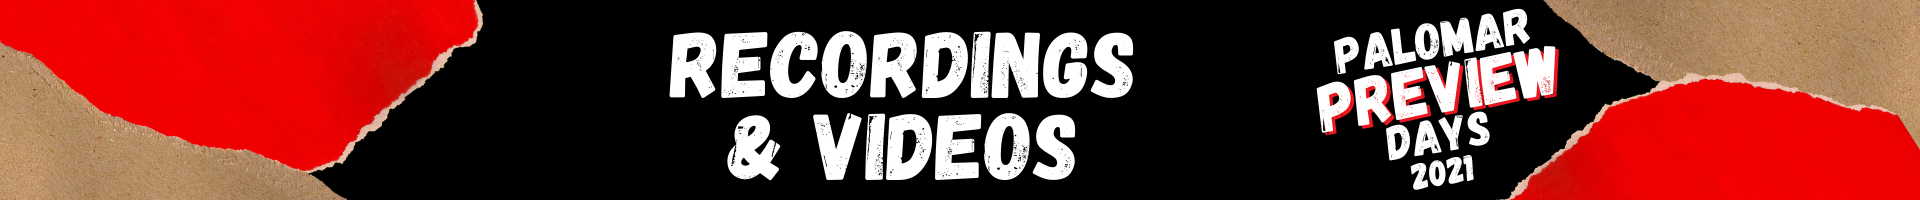 Header: Recordings and Videos